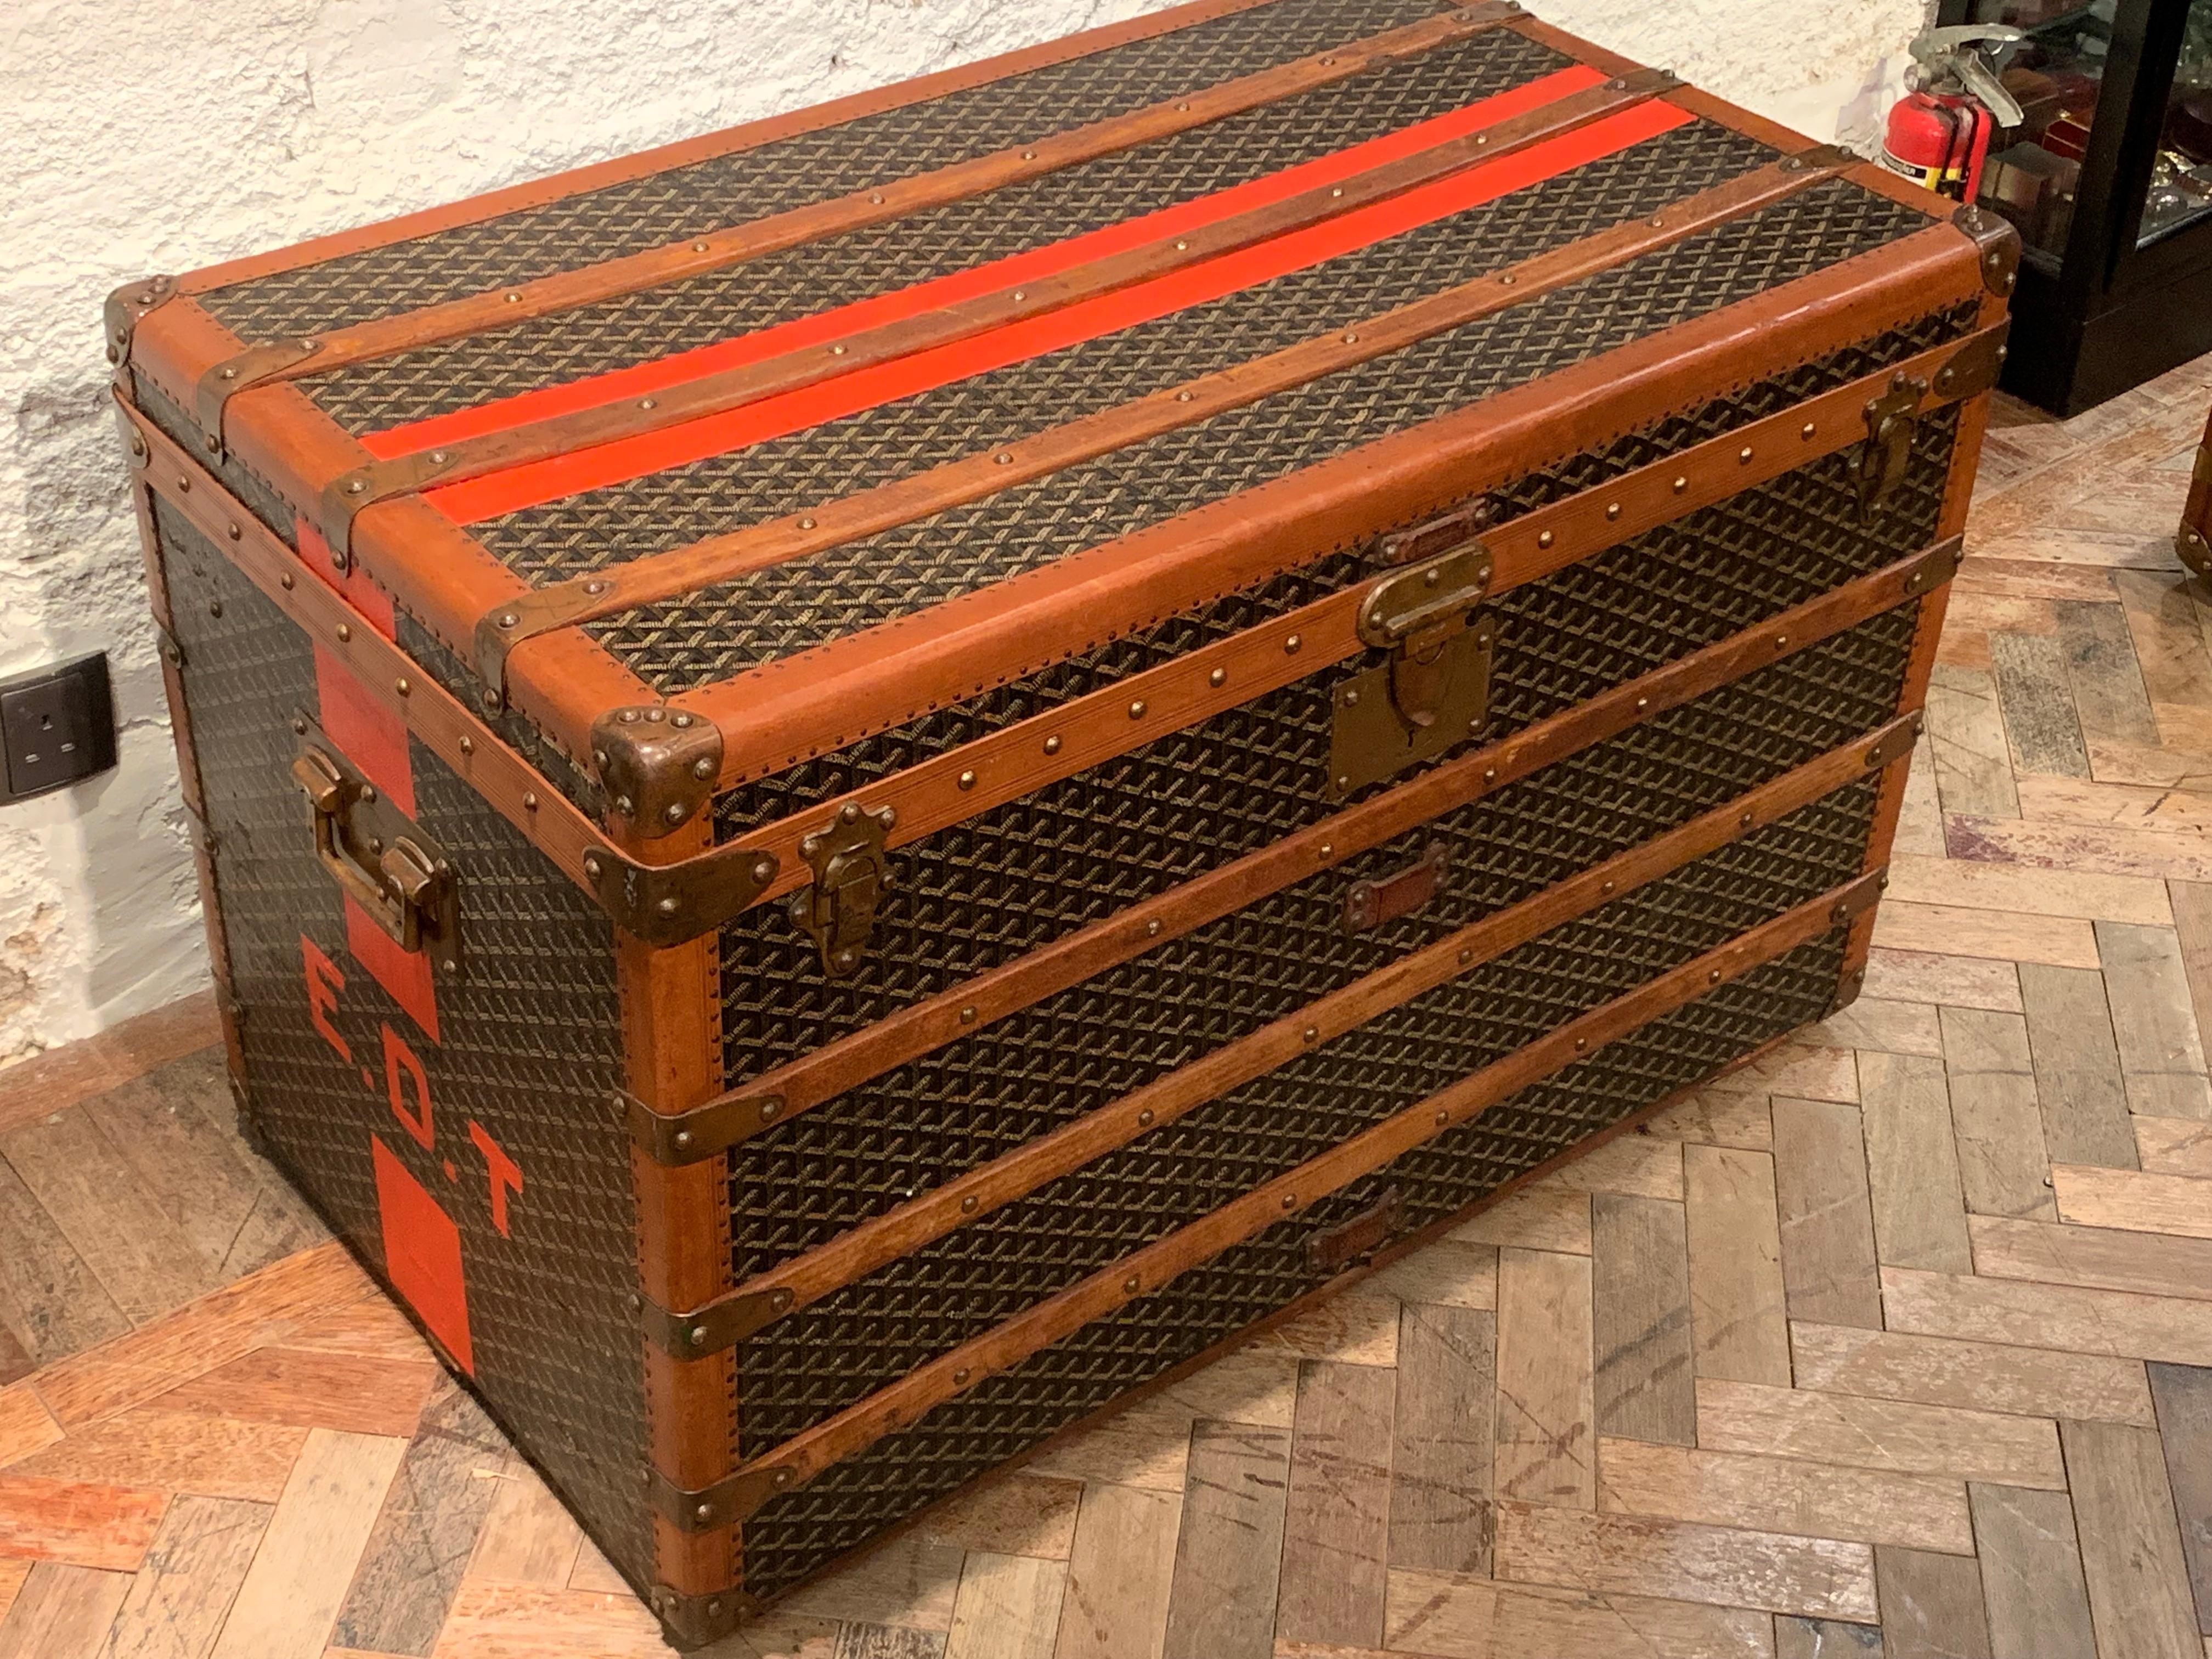 A beautiful High Steamer trunk that is entirely covered with the signature Chevron canvas from Goyard circa 1930s. 

It features:
- Lozine trim, 
- Wooden slats 
- Brass hardware. 


The spacious interior features the entirely original